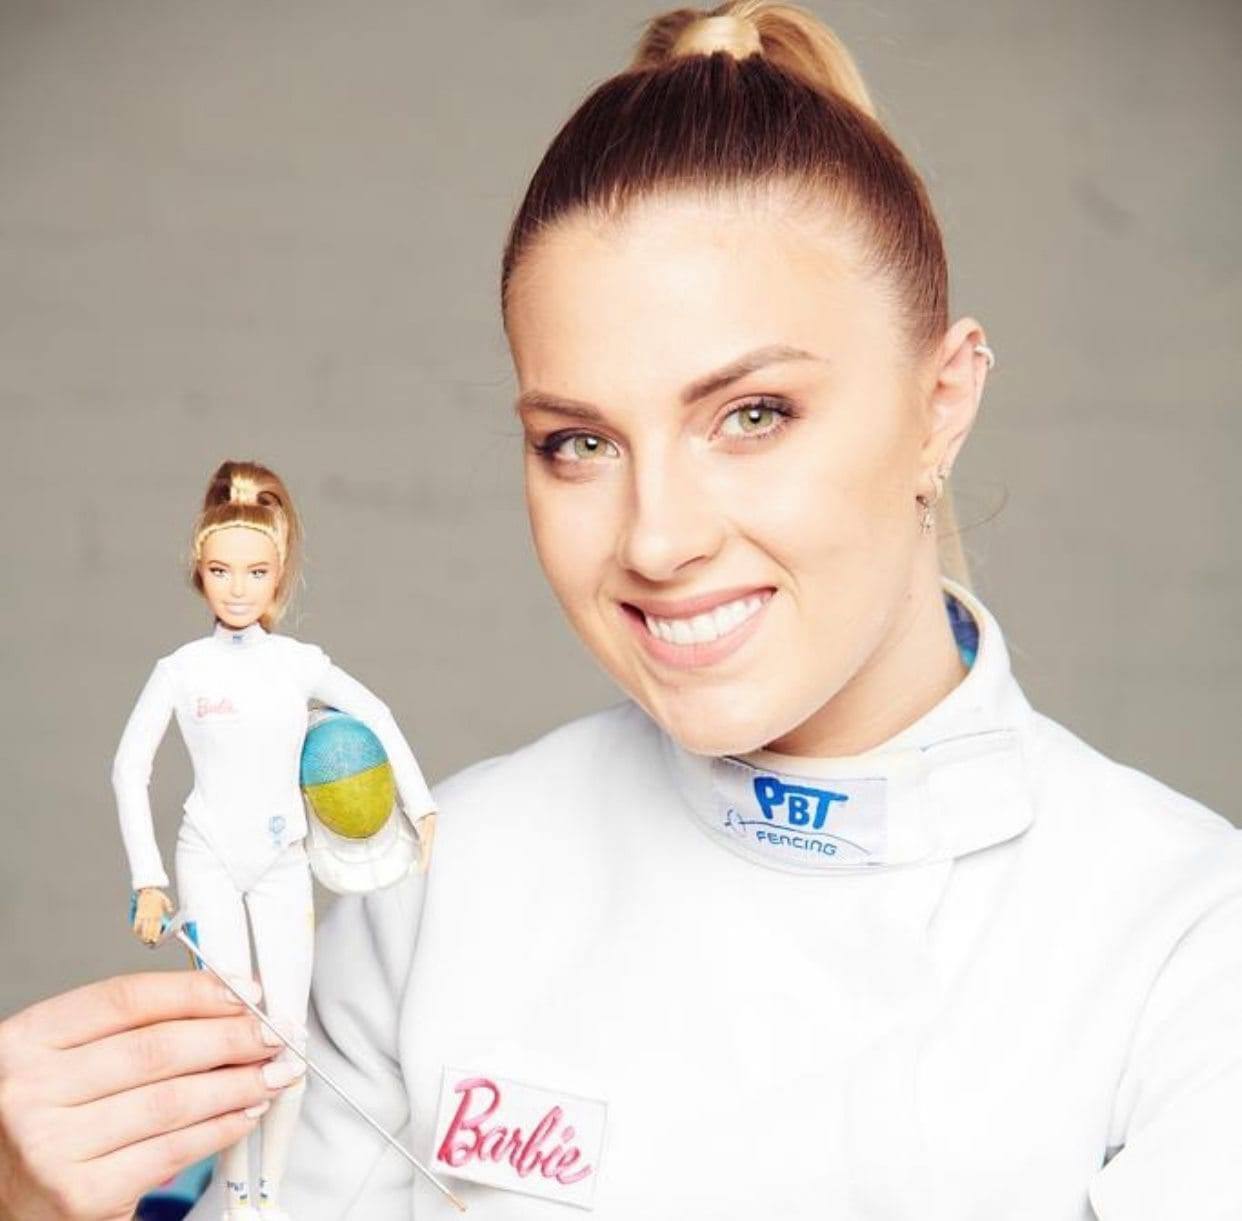 Harlan, who put the Russian woman in her place at the competition, was the prototype of the Barbie fencer: what the doll looks like